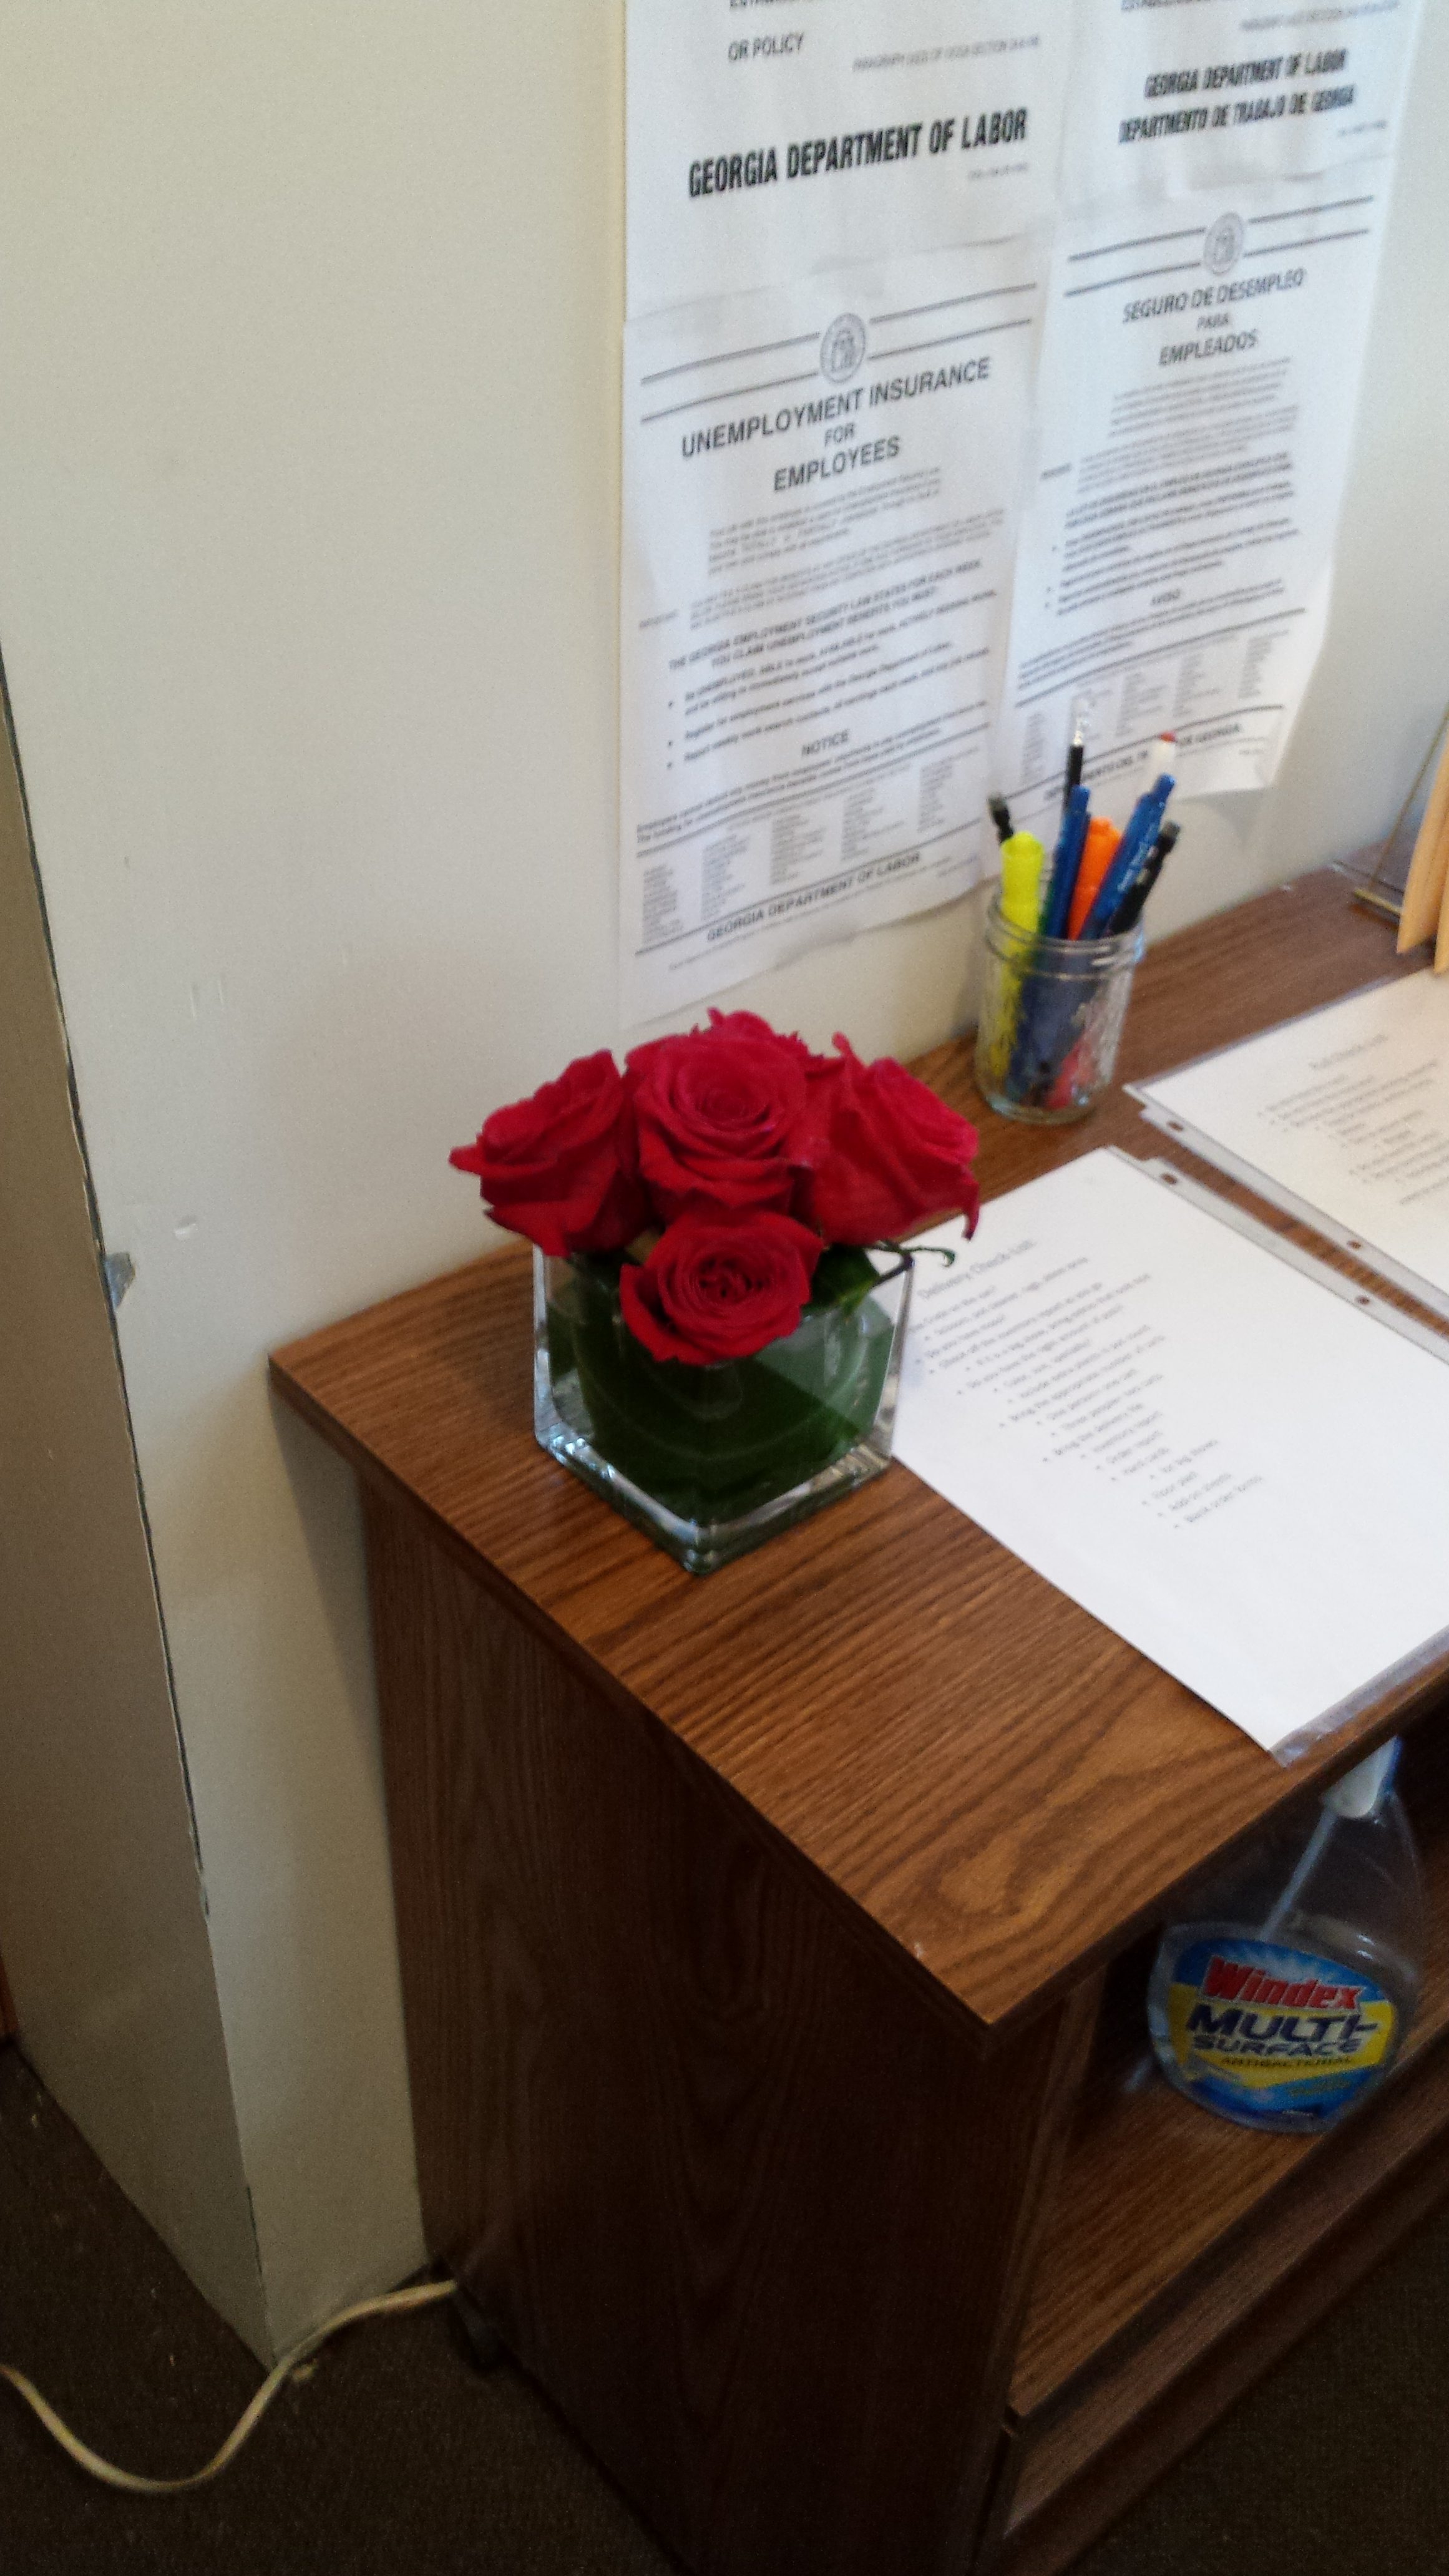 Small red rose arrangement